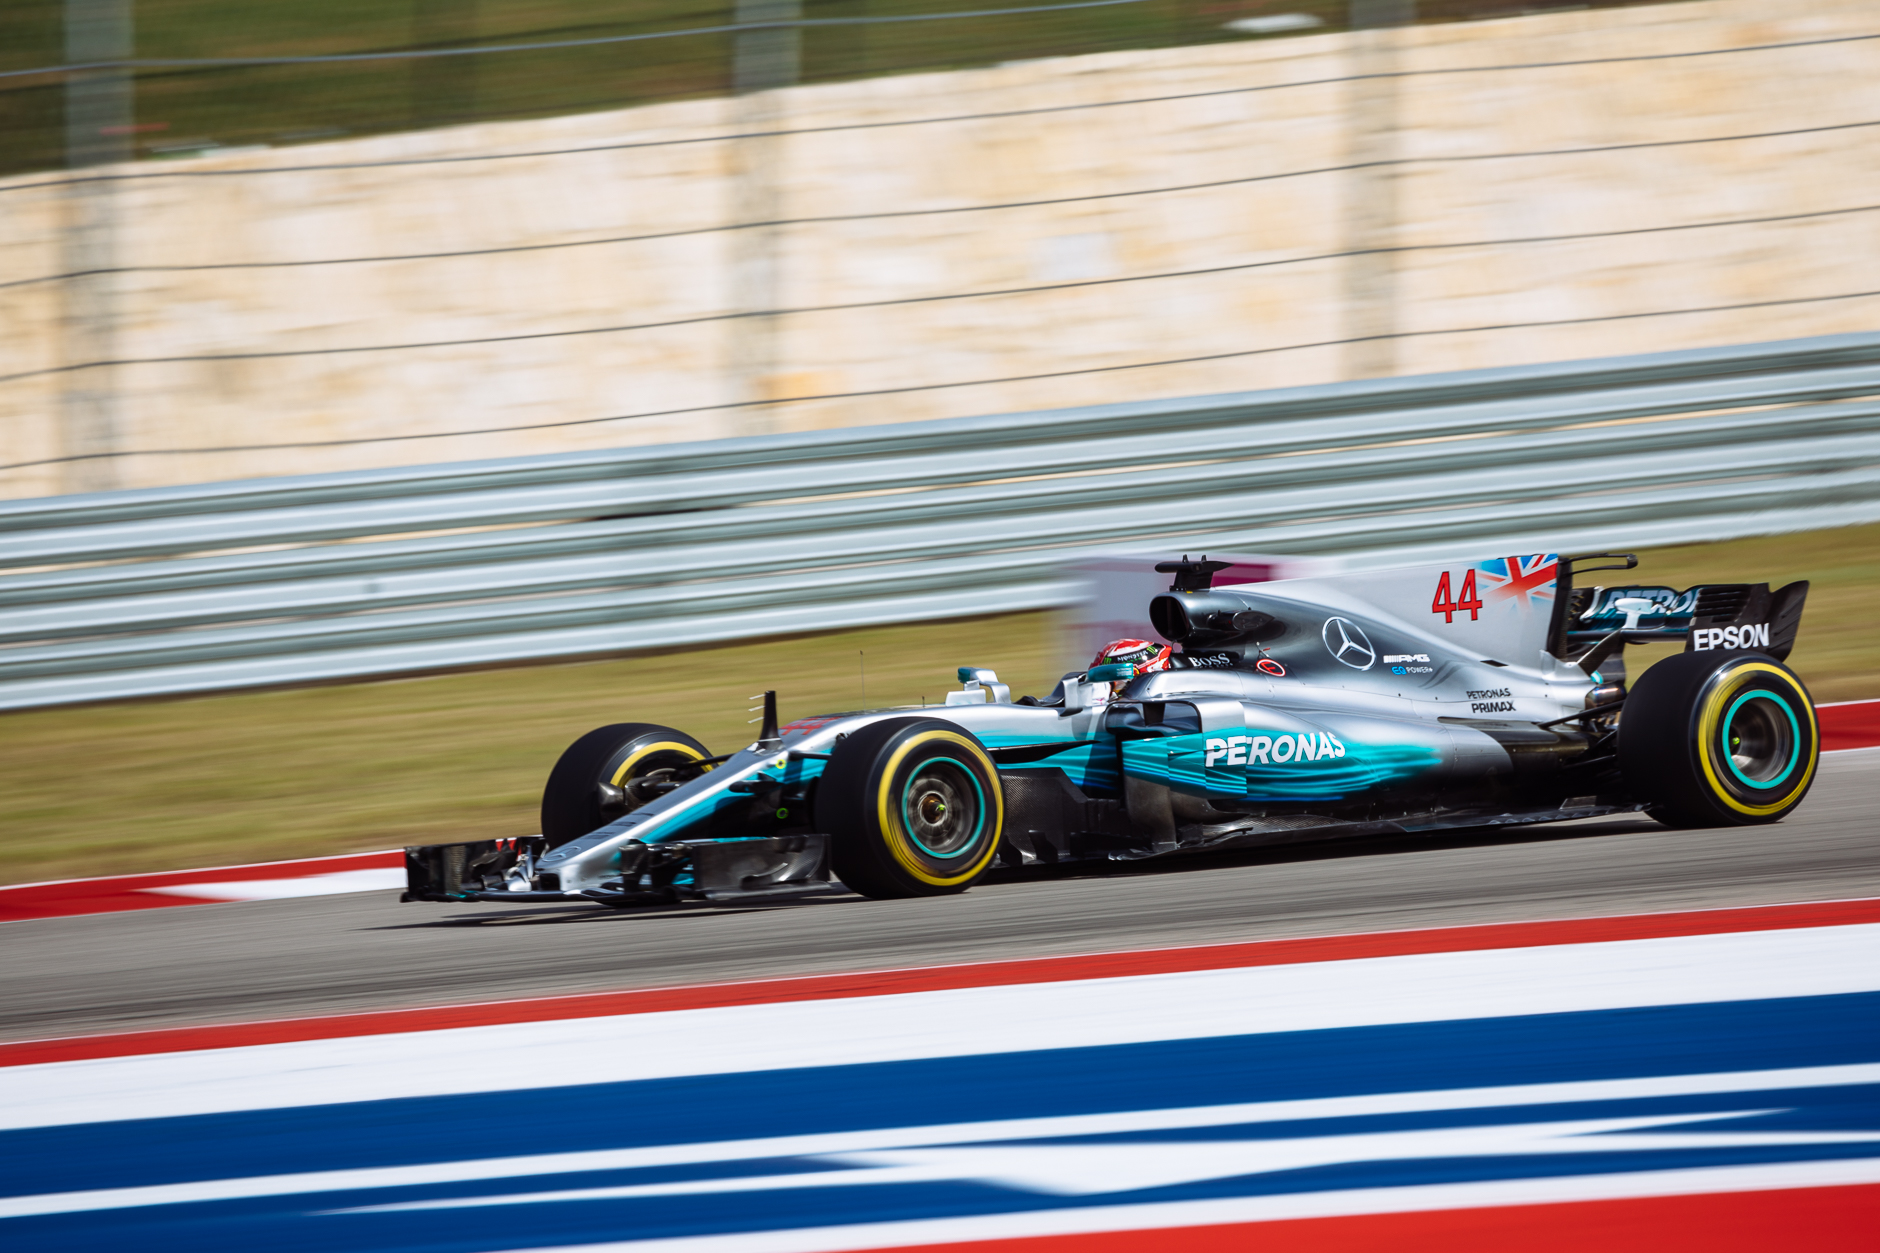 Mercedes AMG Petronas' Lewis Hamilton during FP2 Friday afternoon.